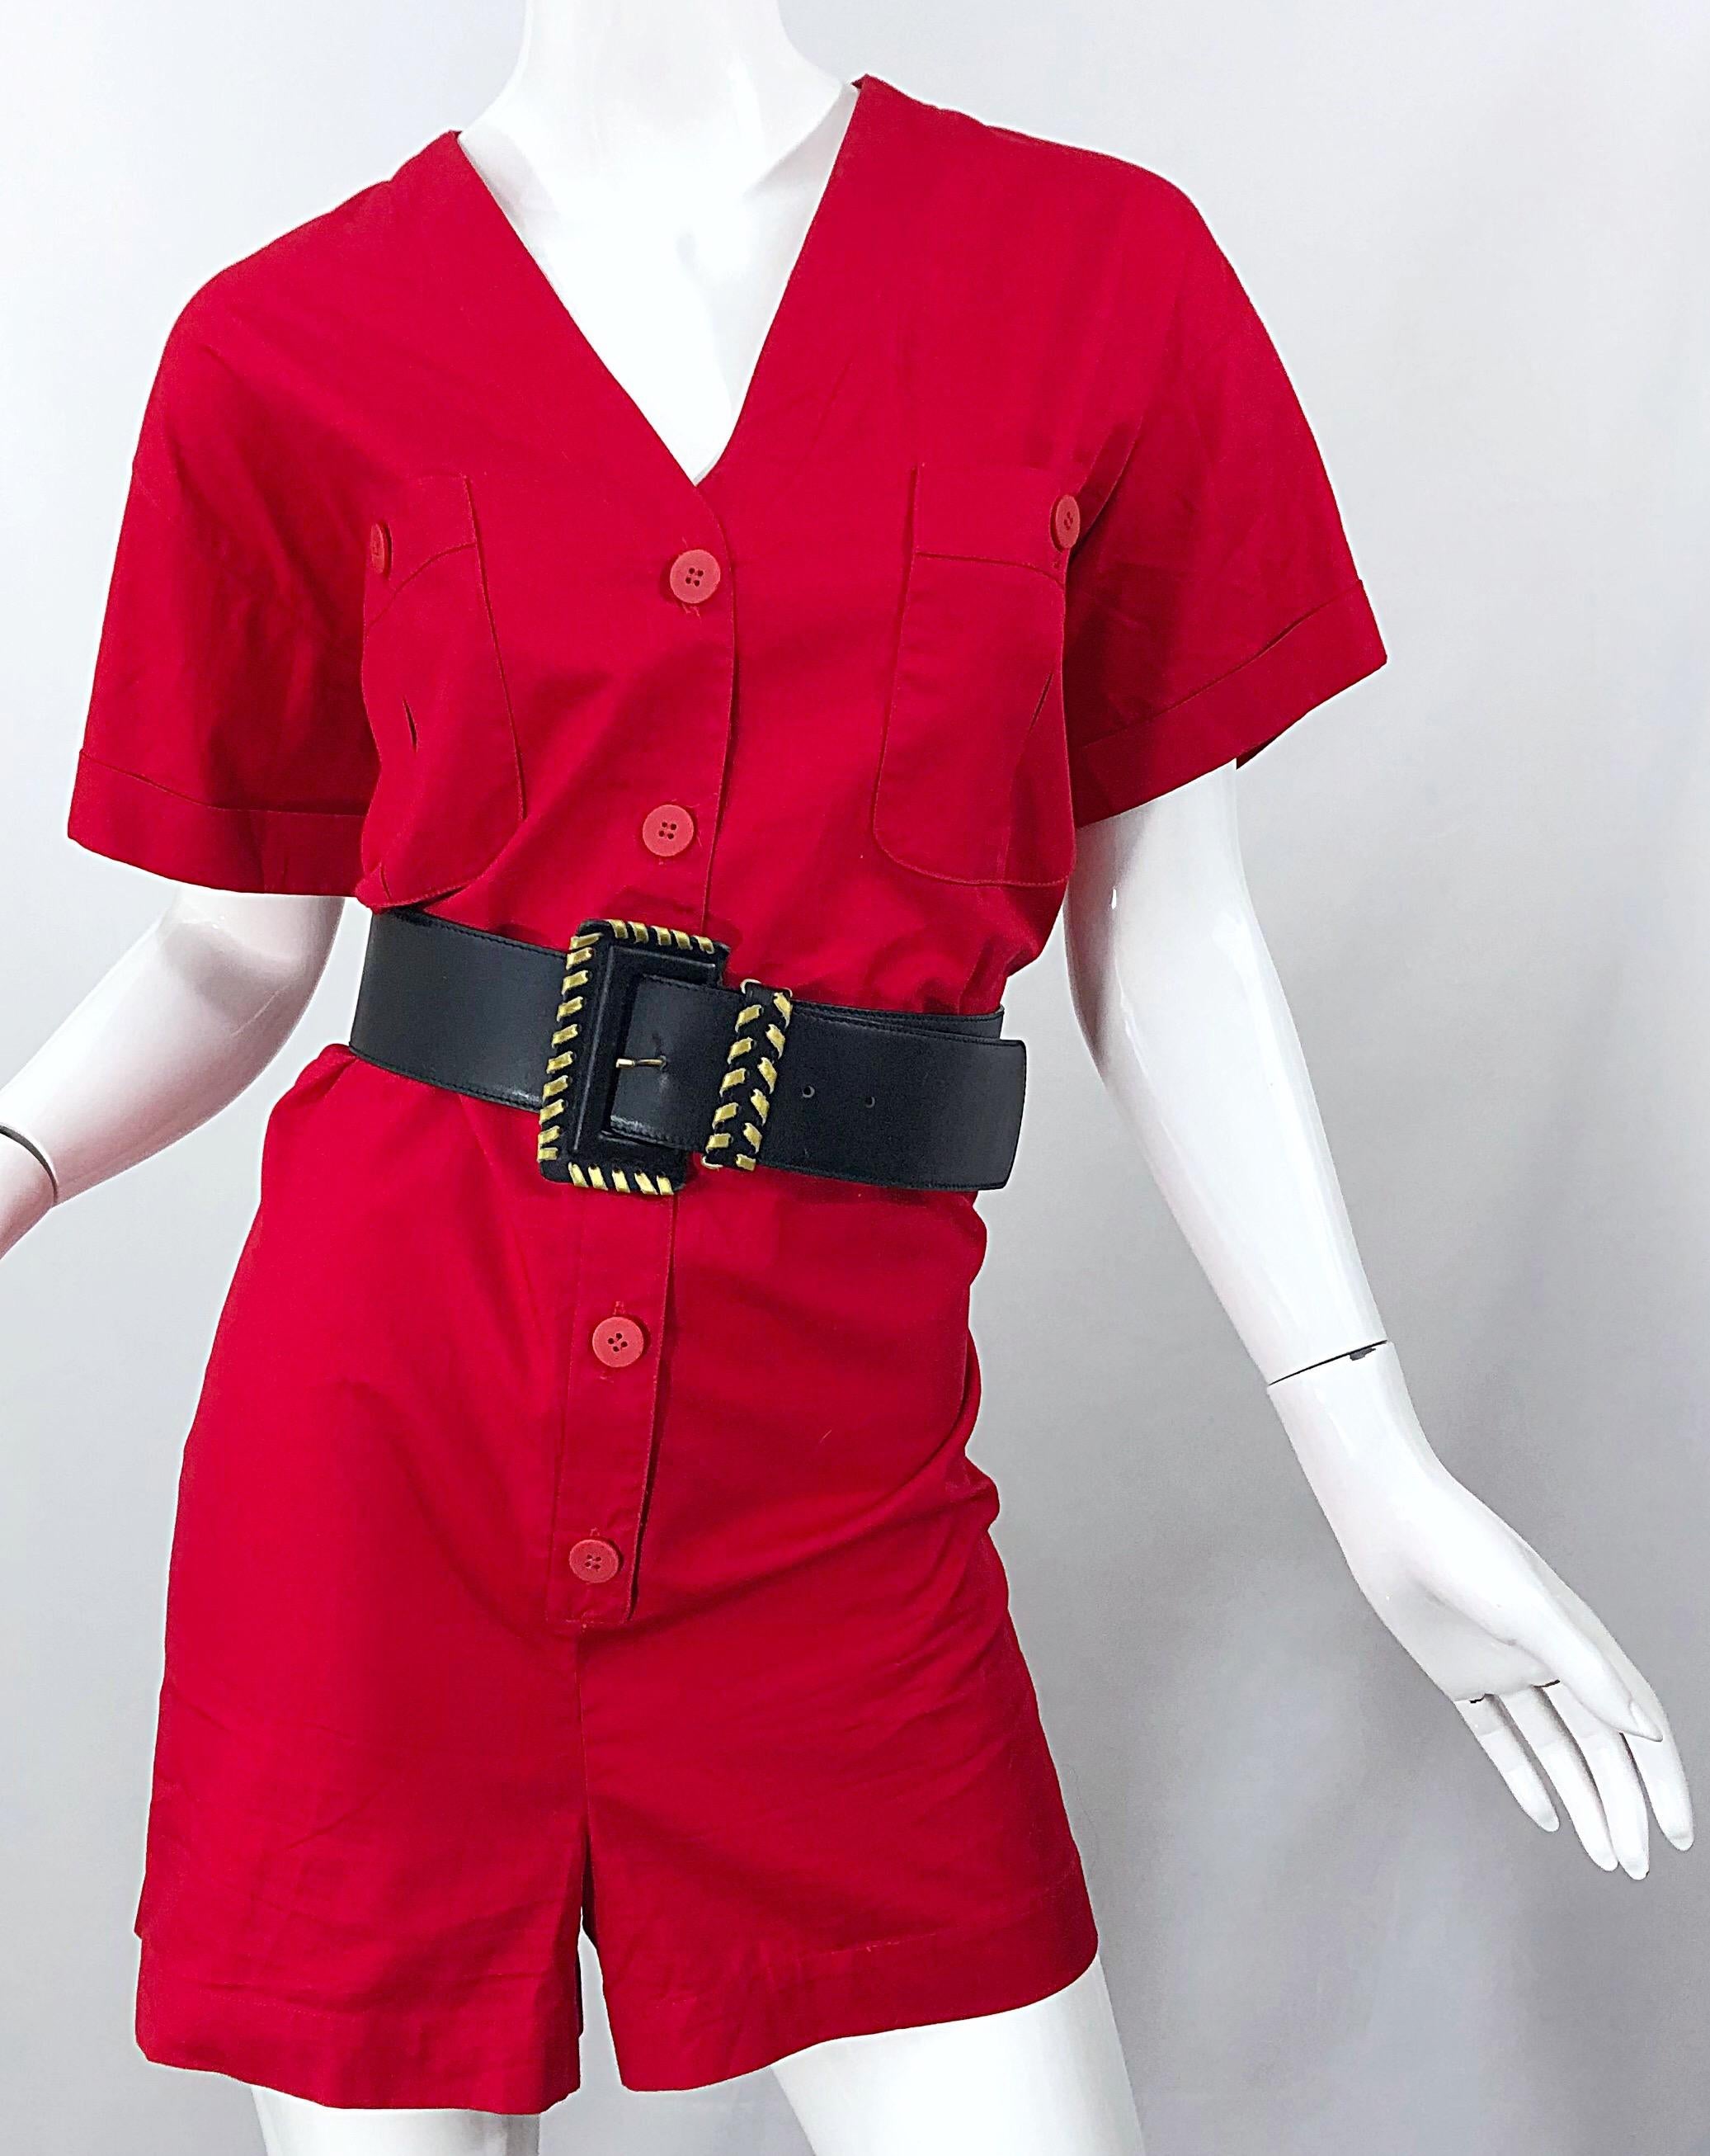 NWT Vintage Christian Dior Romper Size 14 Lipstick Red Cotton One Piece Jumpsuit For Sale 3